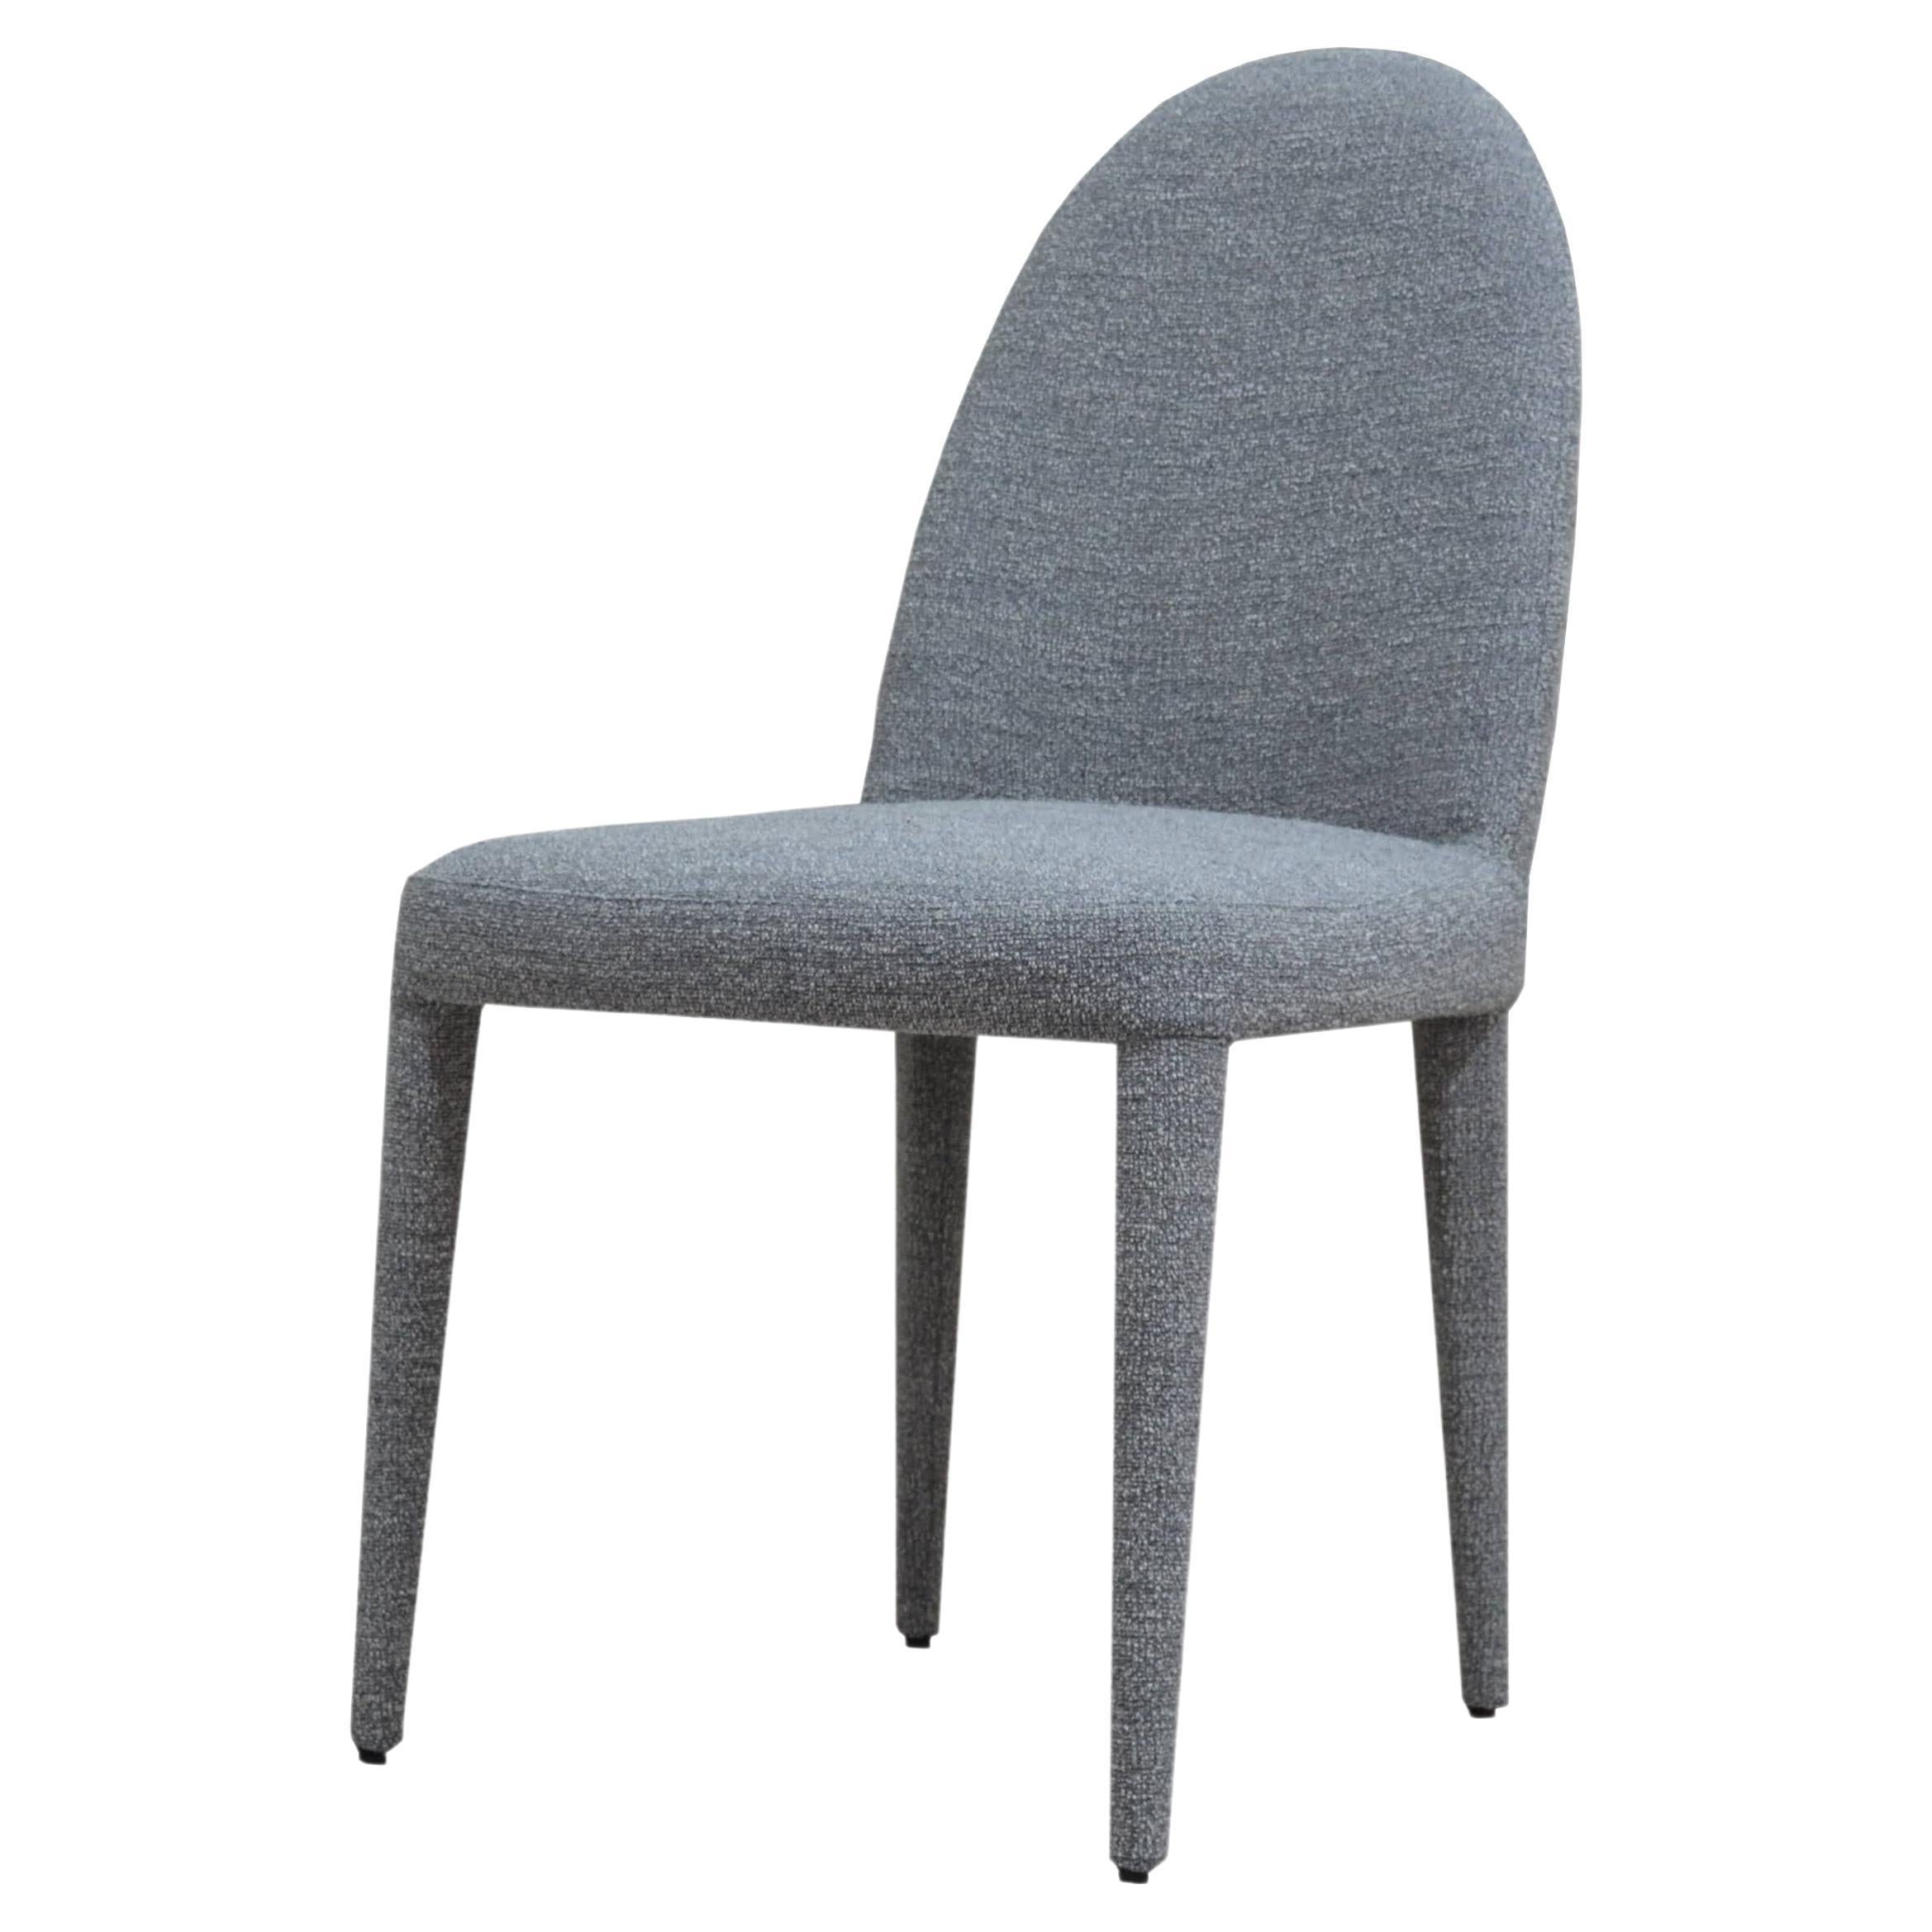 ‘Balzaretti’ Xl Contemporary Upholstered Dining Chair in Grey Fabric For Sale